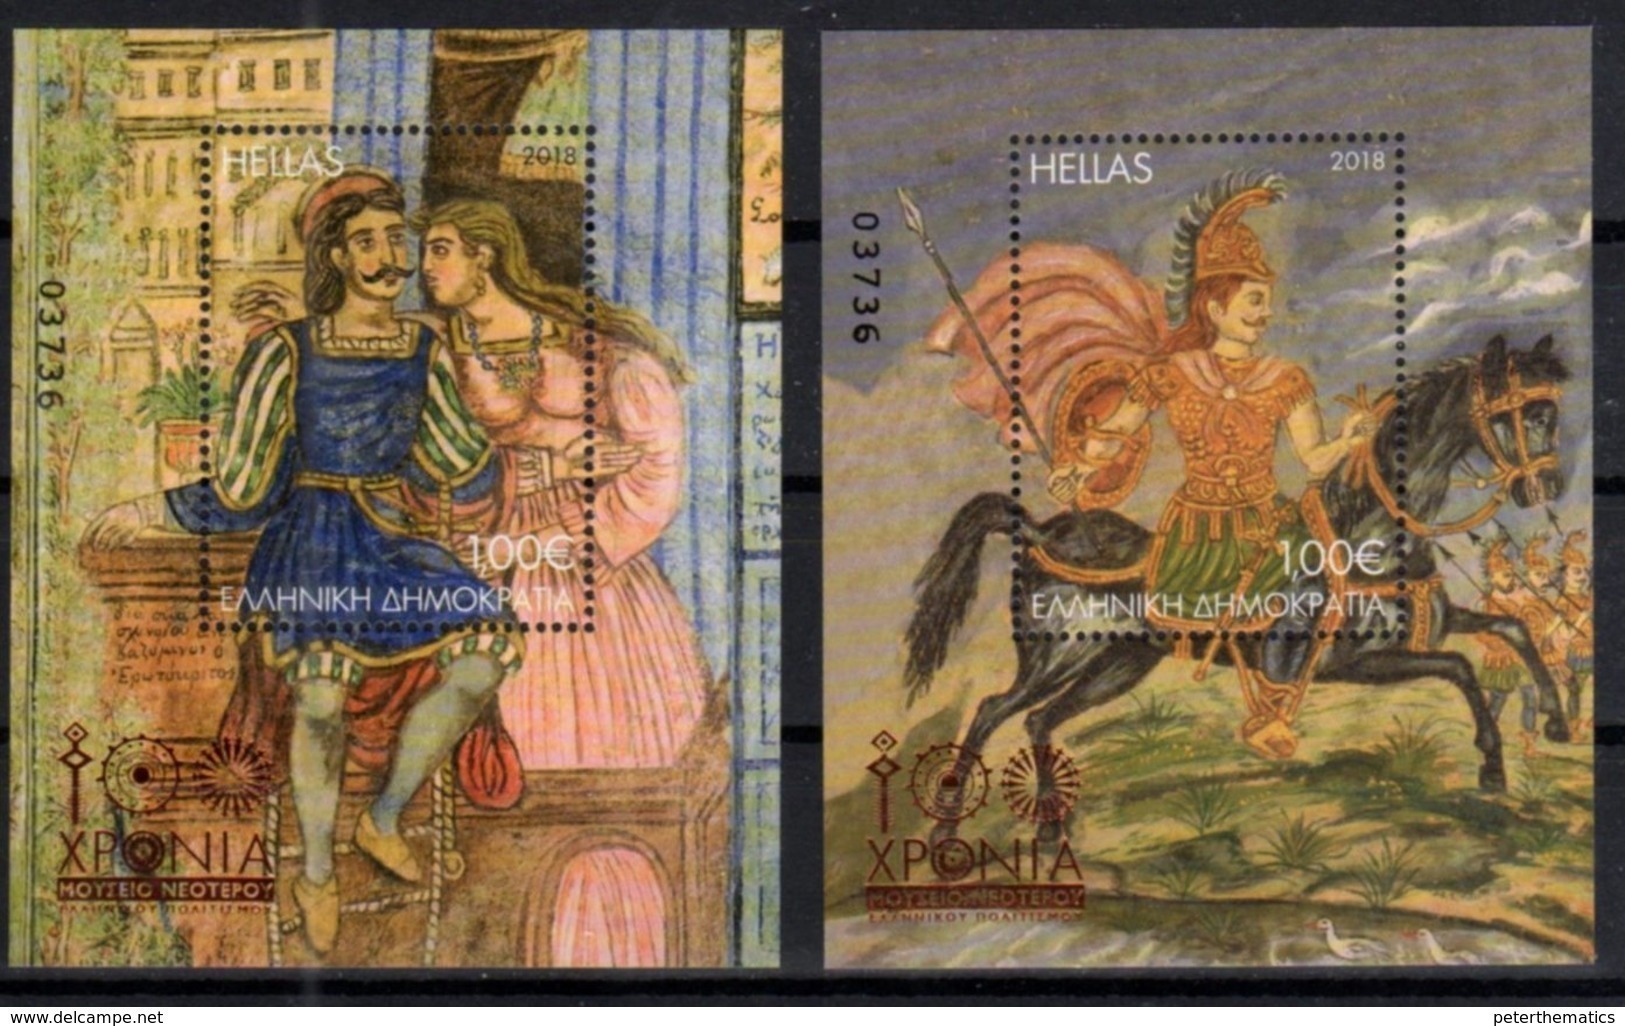 GREECE,  2018, MNH, 100 YEARS MUSEUM OF MODERN GREK CULTURE, ALEXANDER THE GREAT, HORSES, ART, 2 S/SHEETS - Museums